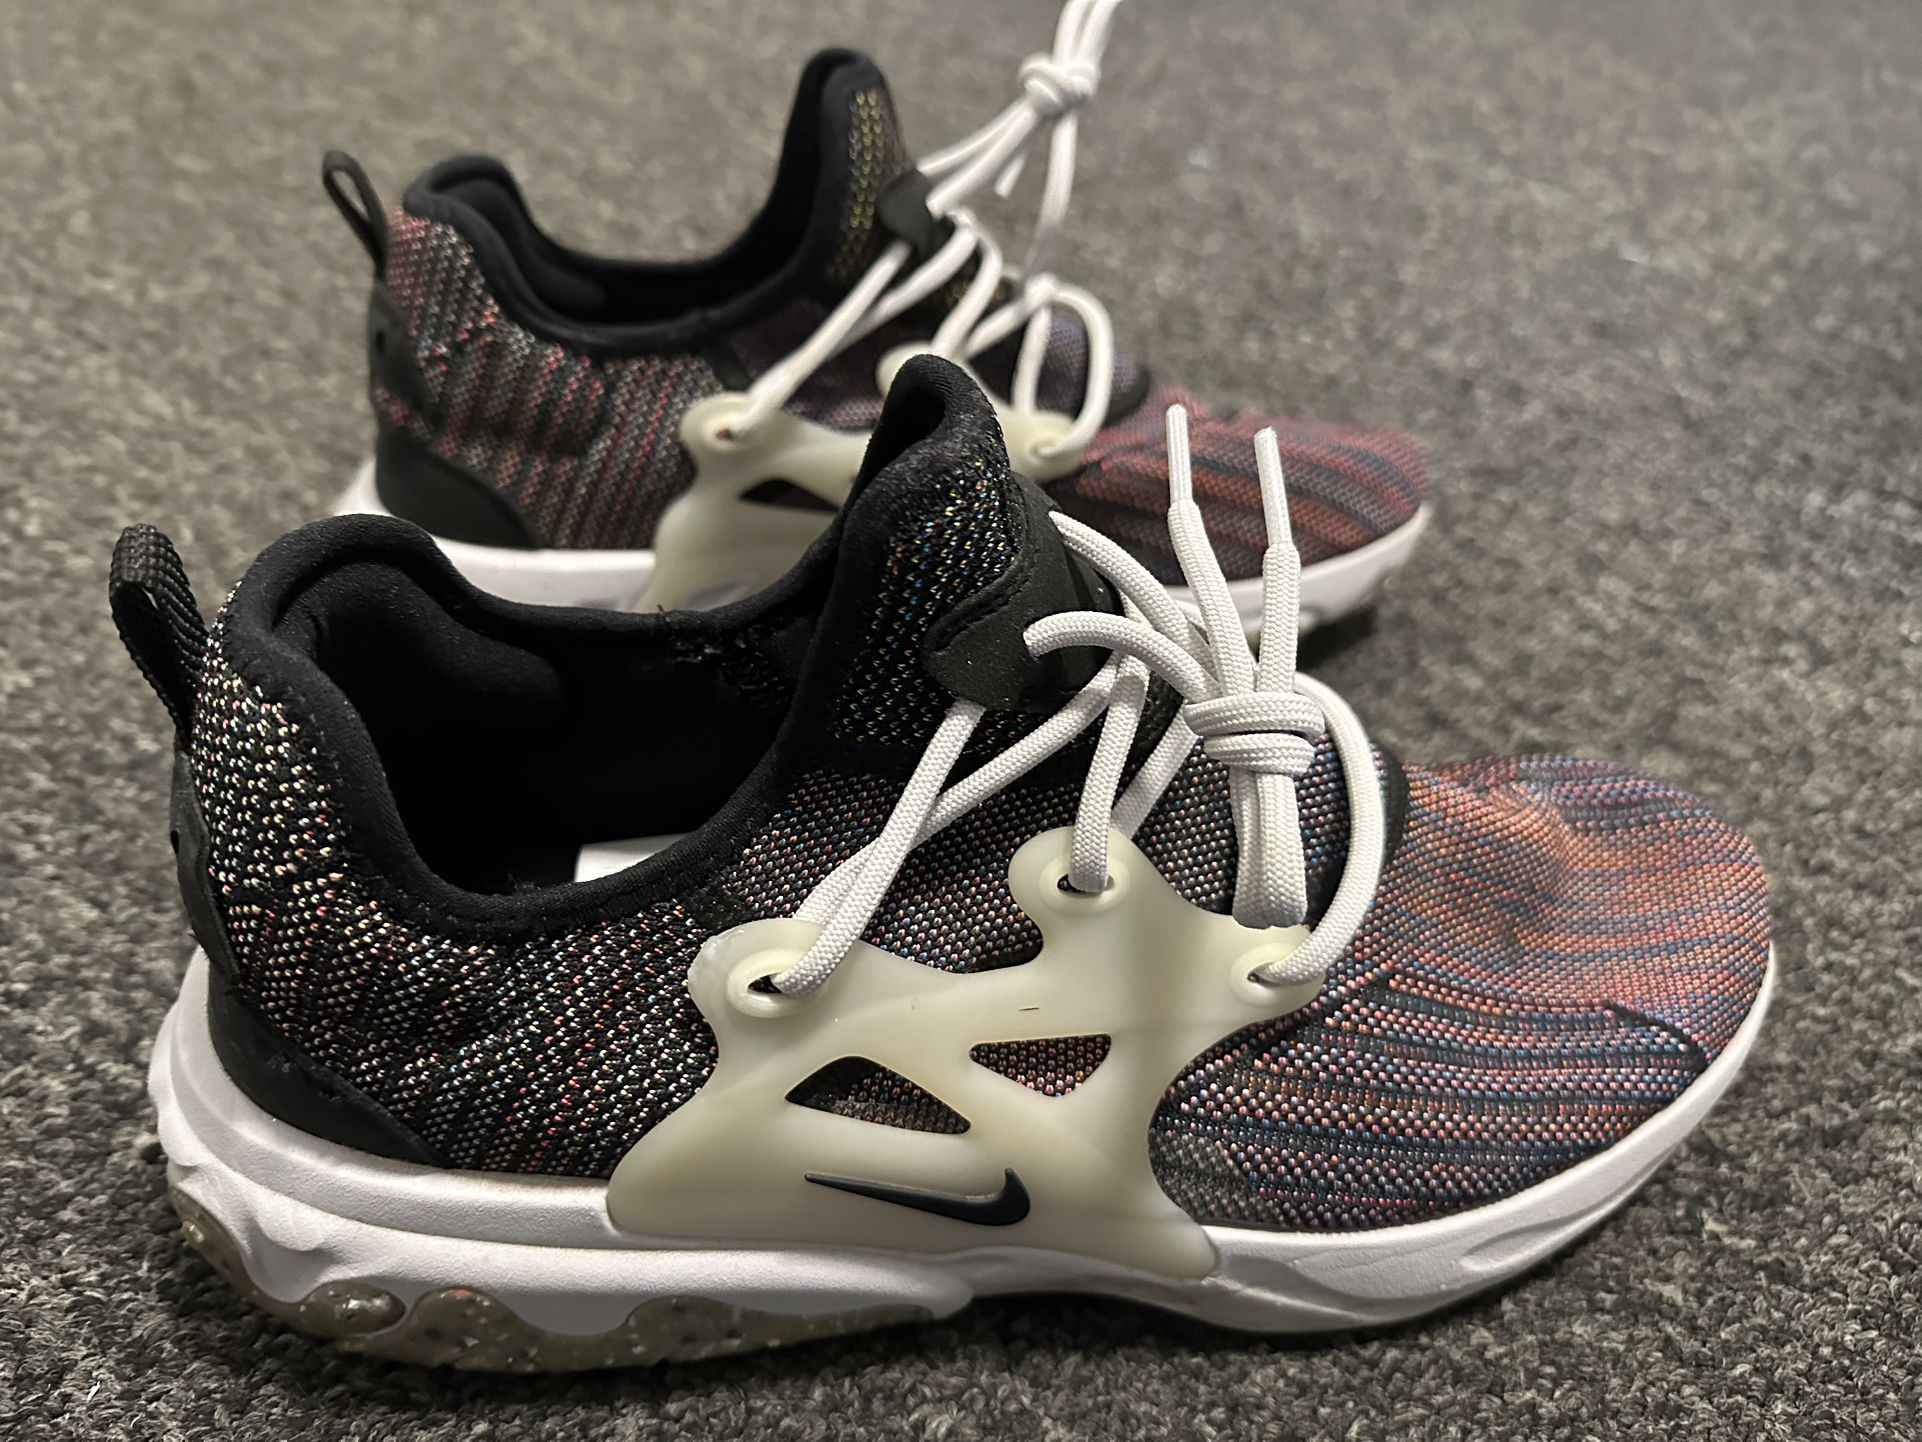 Forskel stemning Akademi Nike Mens React Presto Flyknit for Sale in Arlington Heights, IL - OfferUp